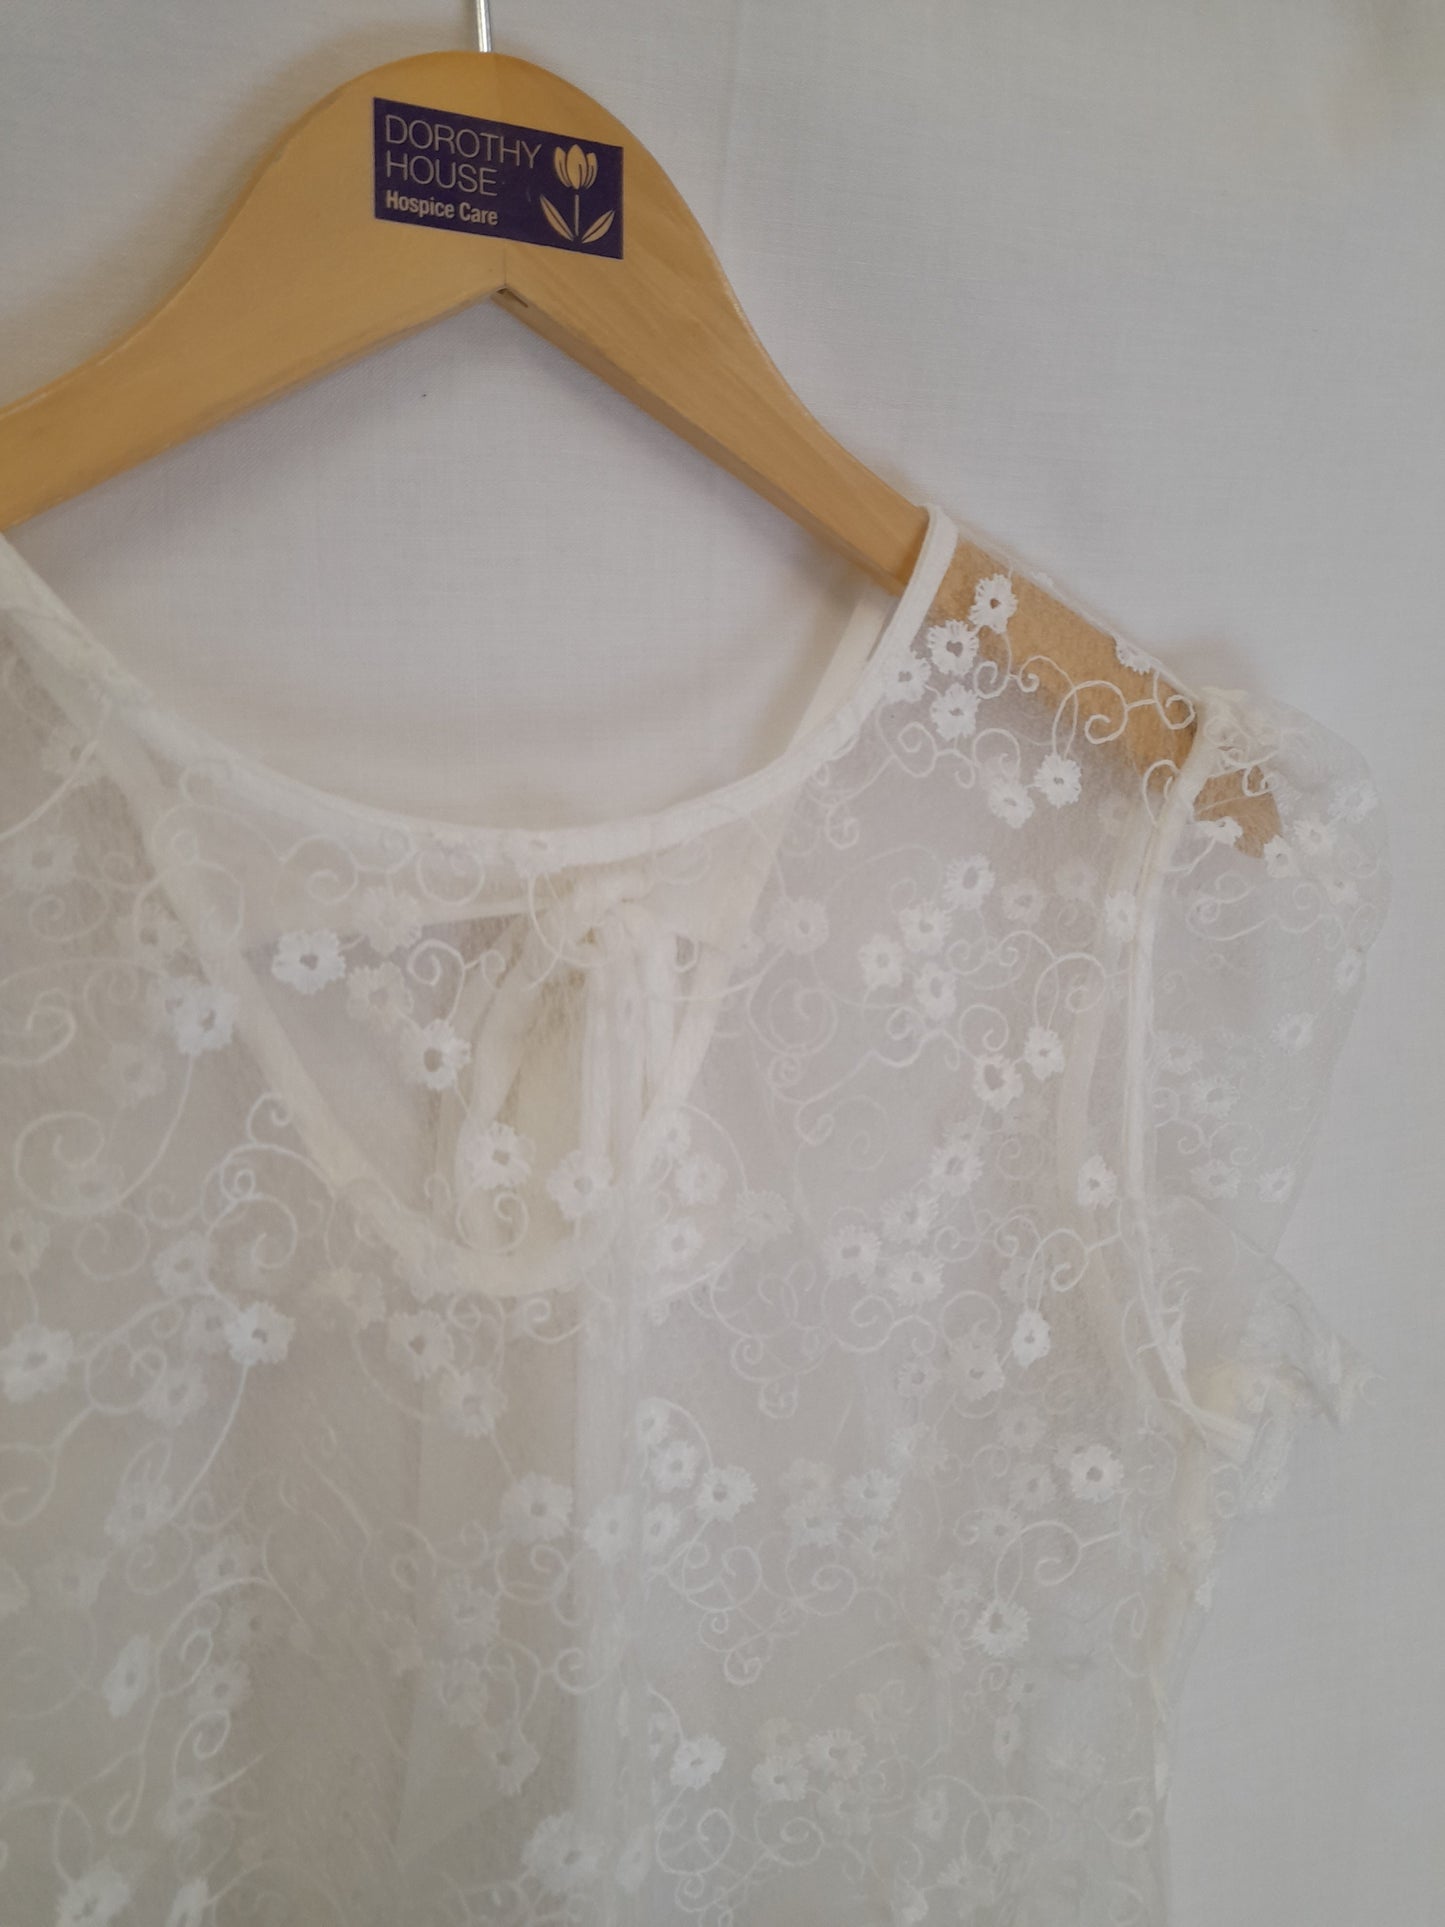 White Lace Bow Back Sheer T-Shirt Size M